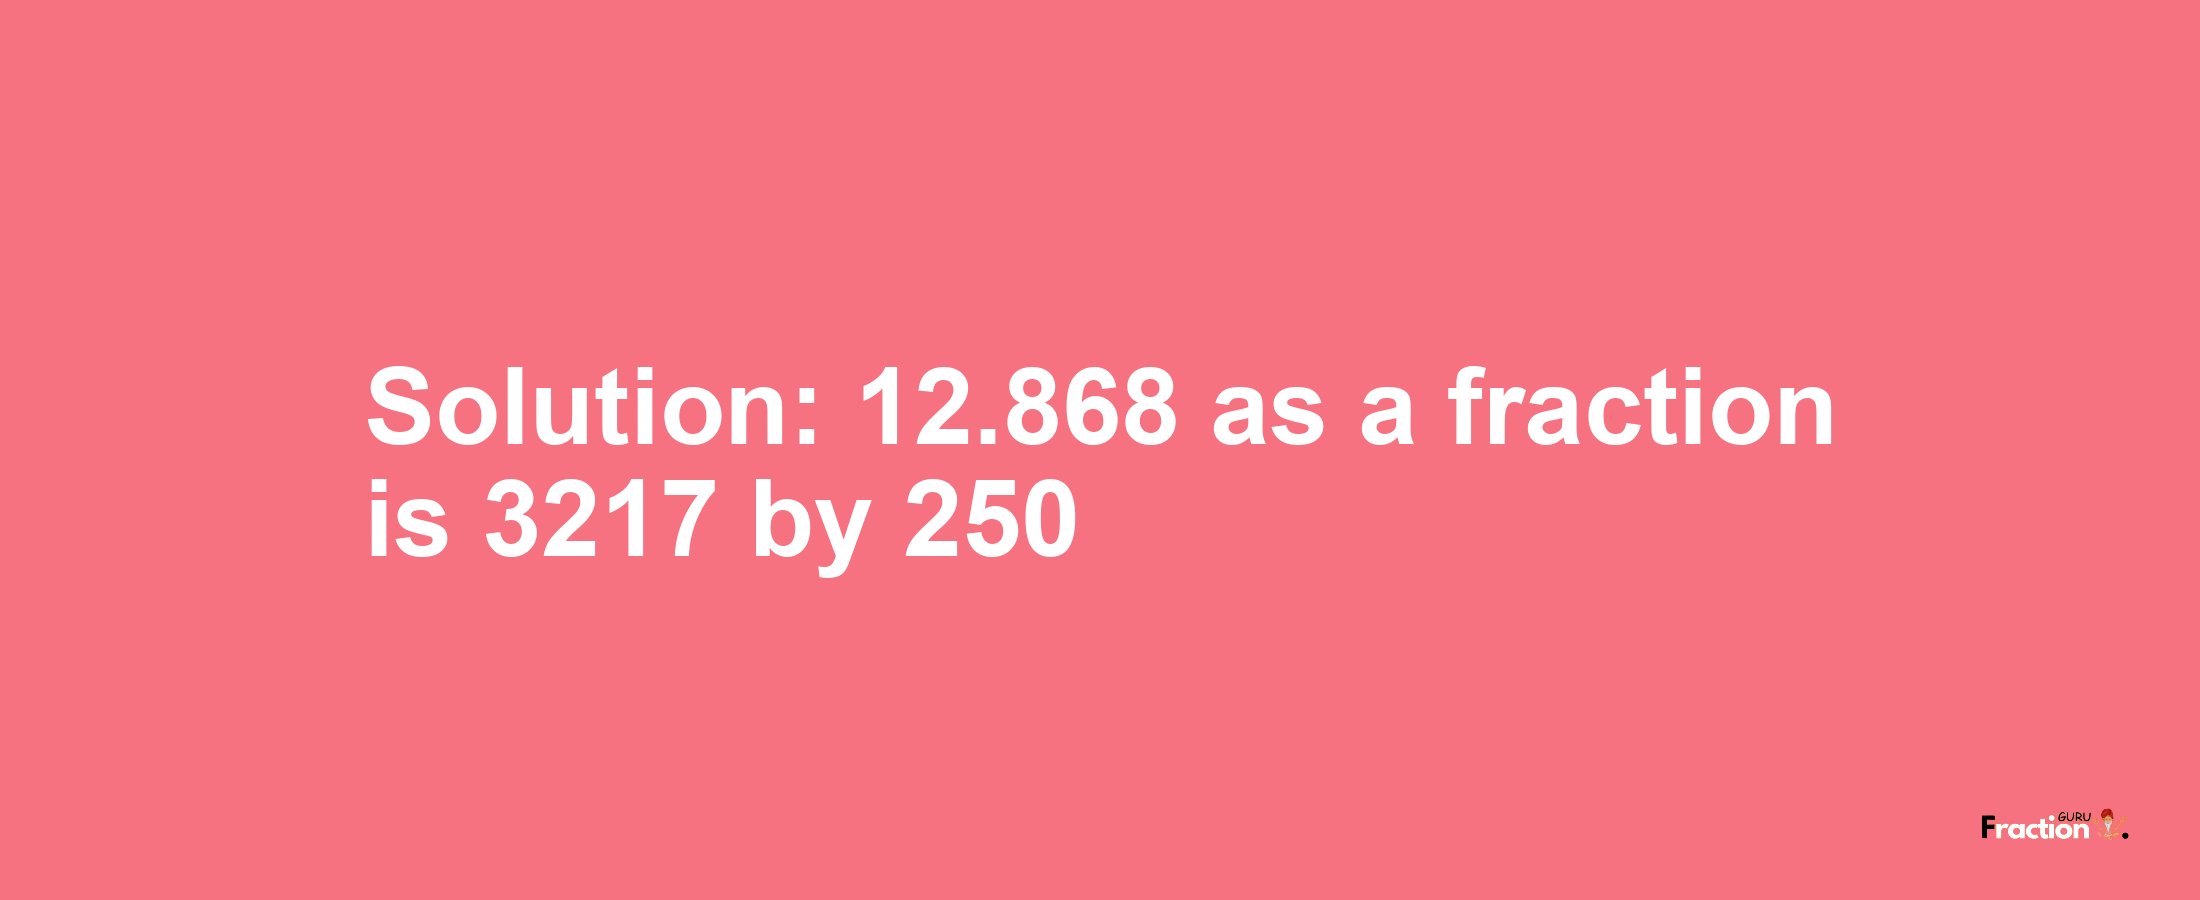 Solution:12.868 as a fraction is 3217/250